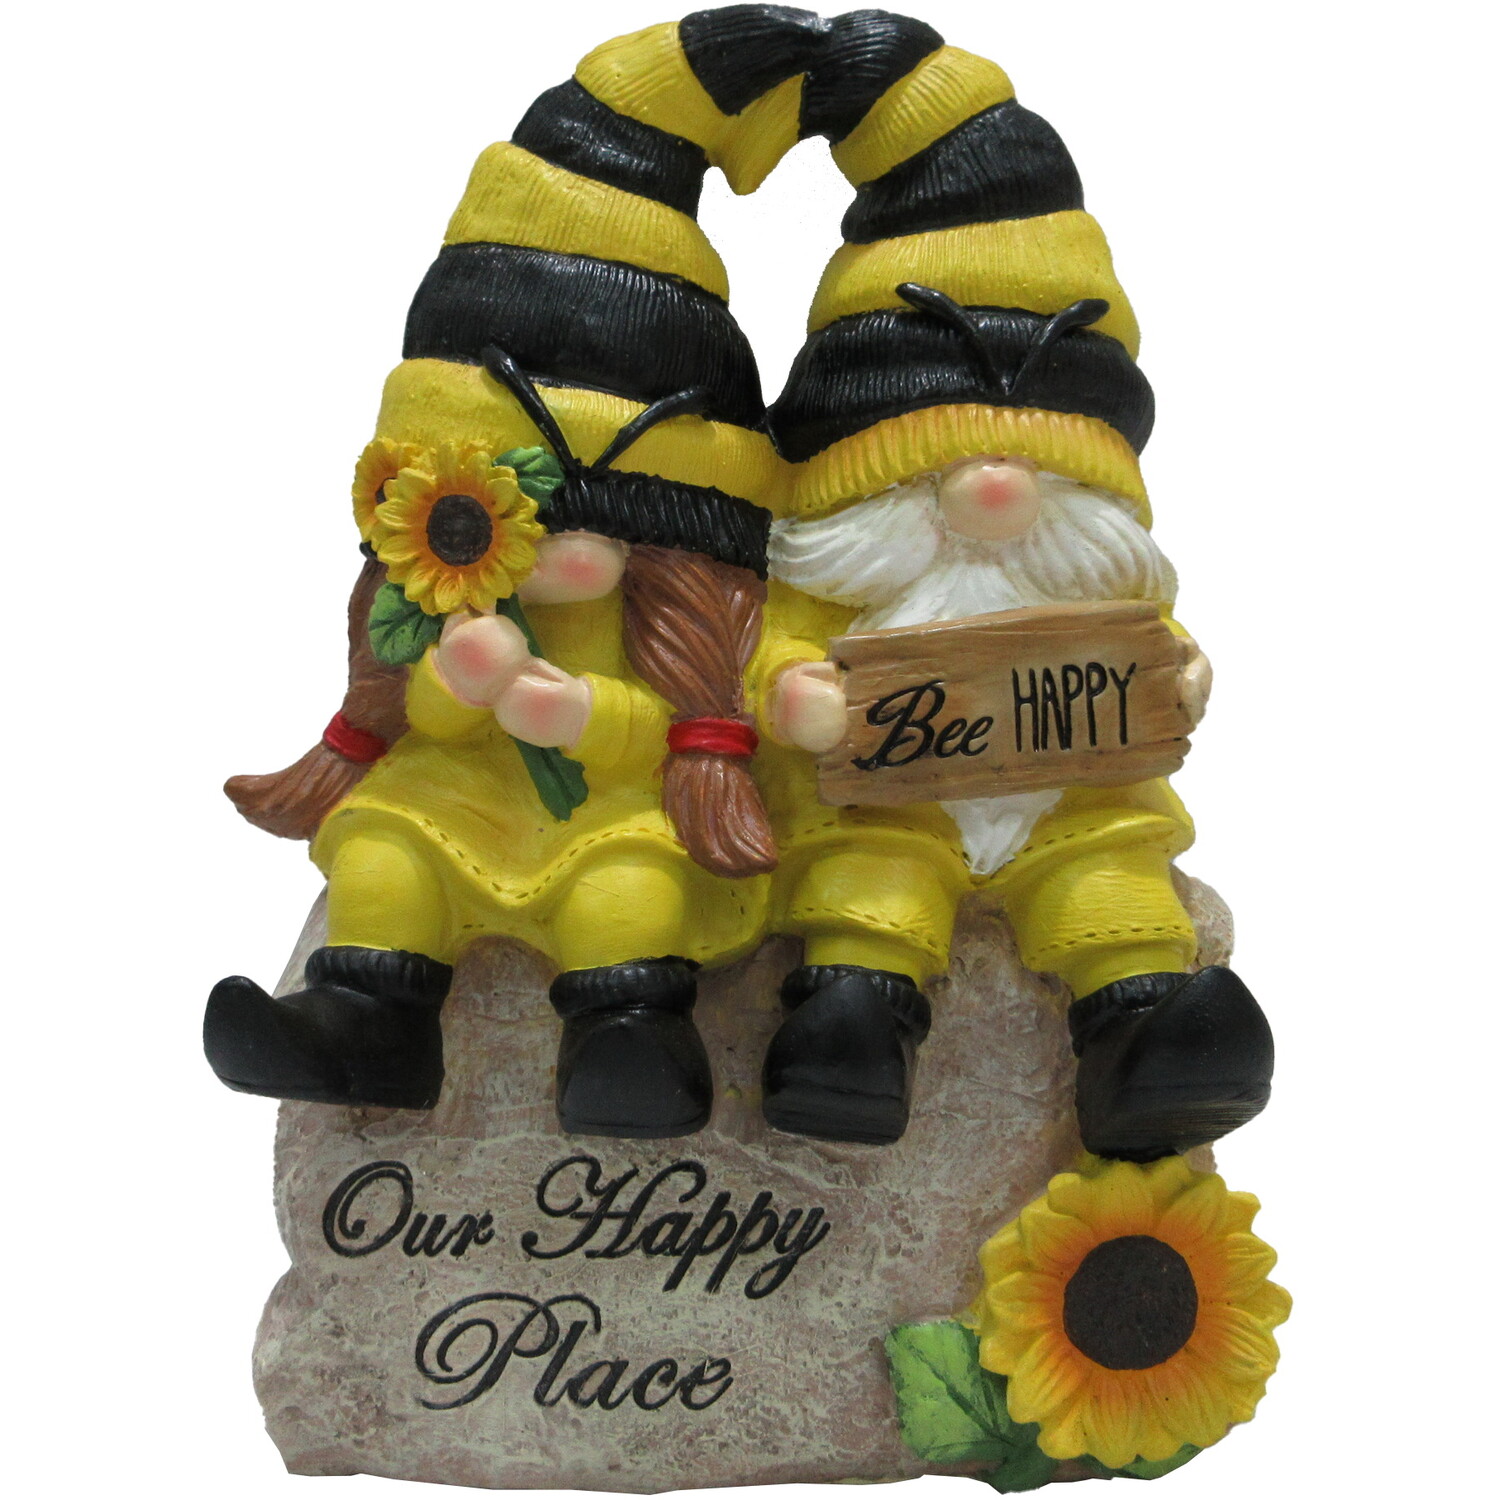 Mr and Mrs Gonk Yellow Ornament Image